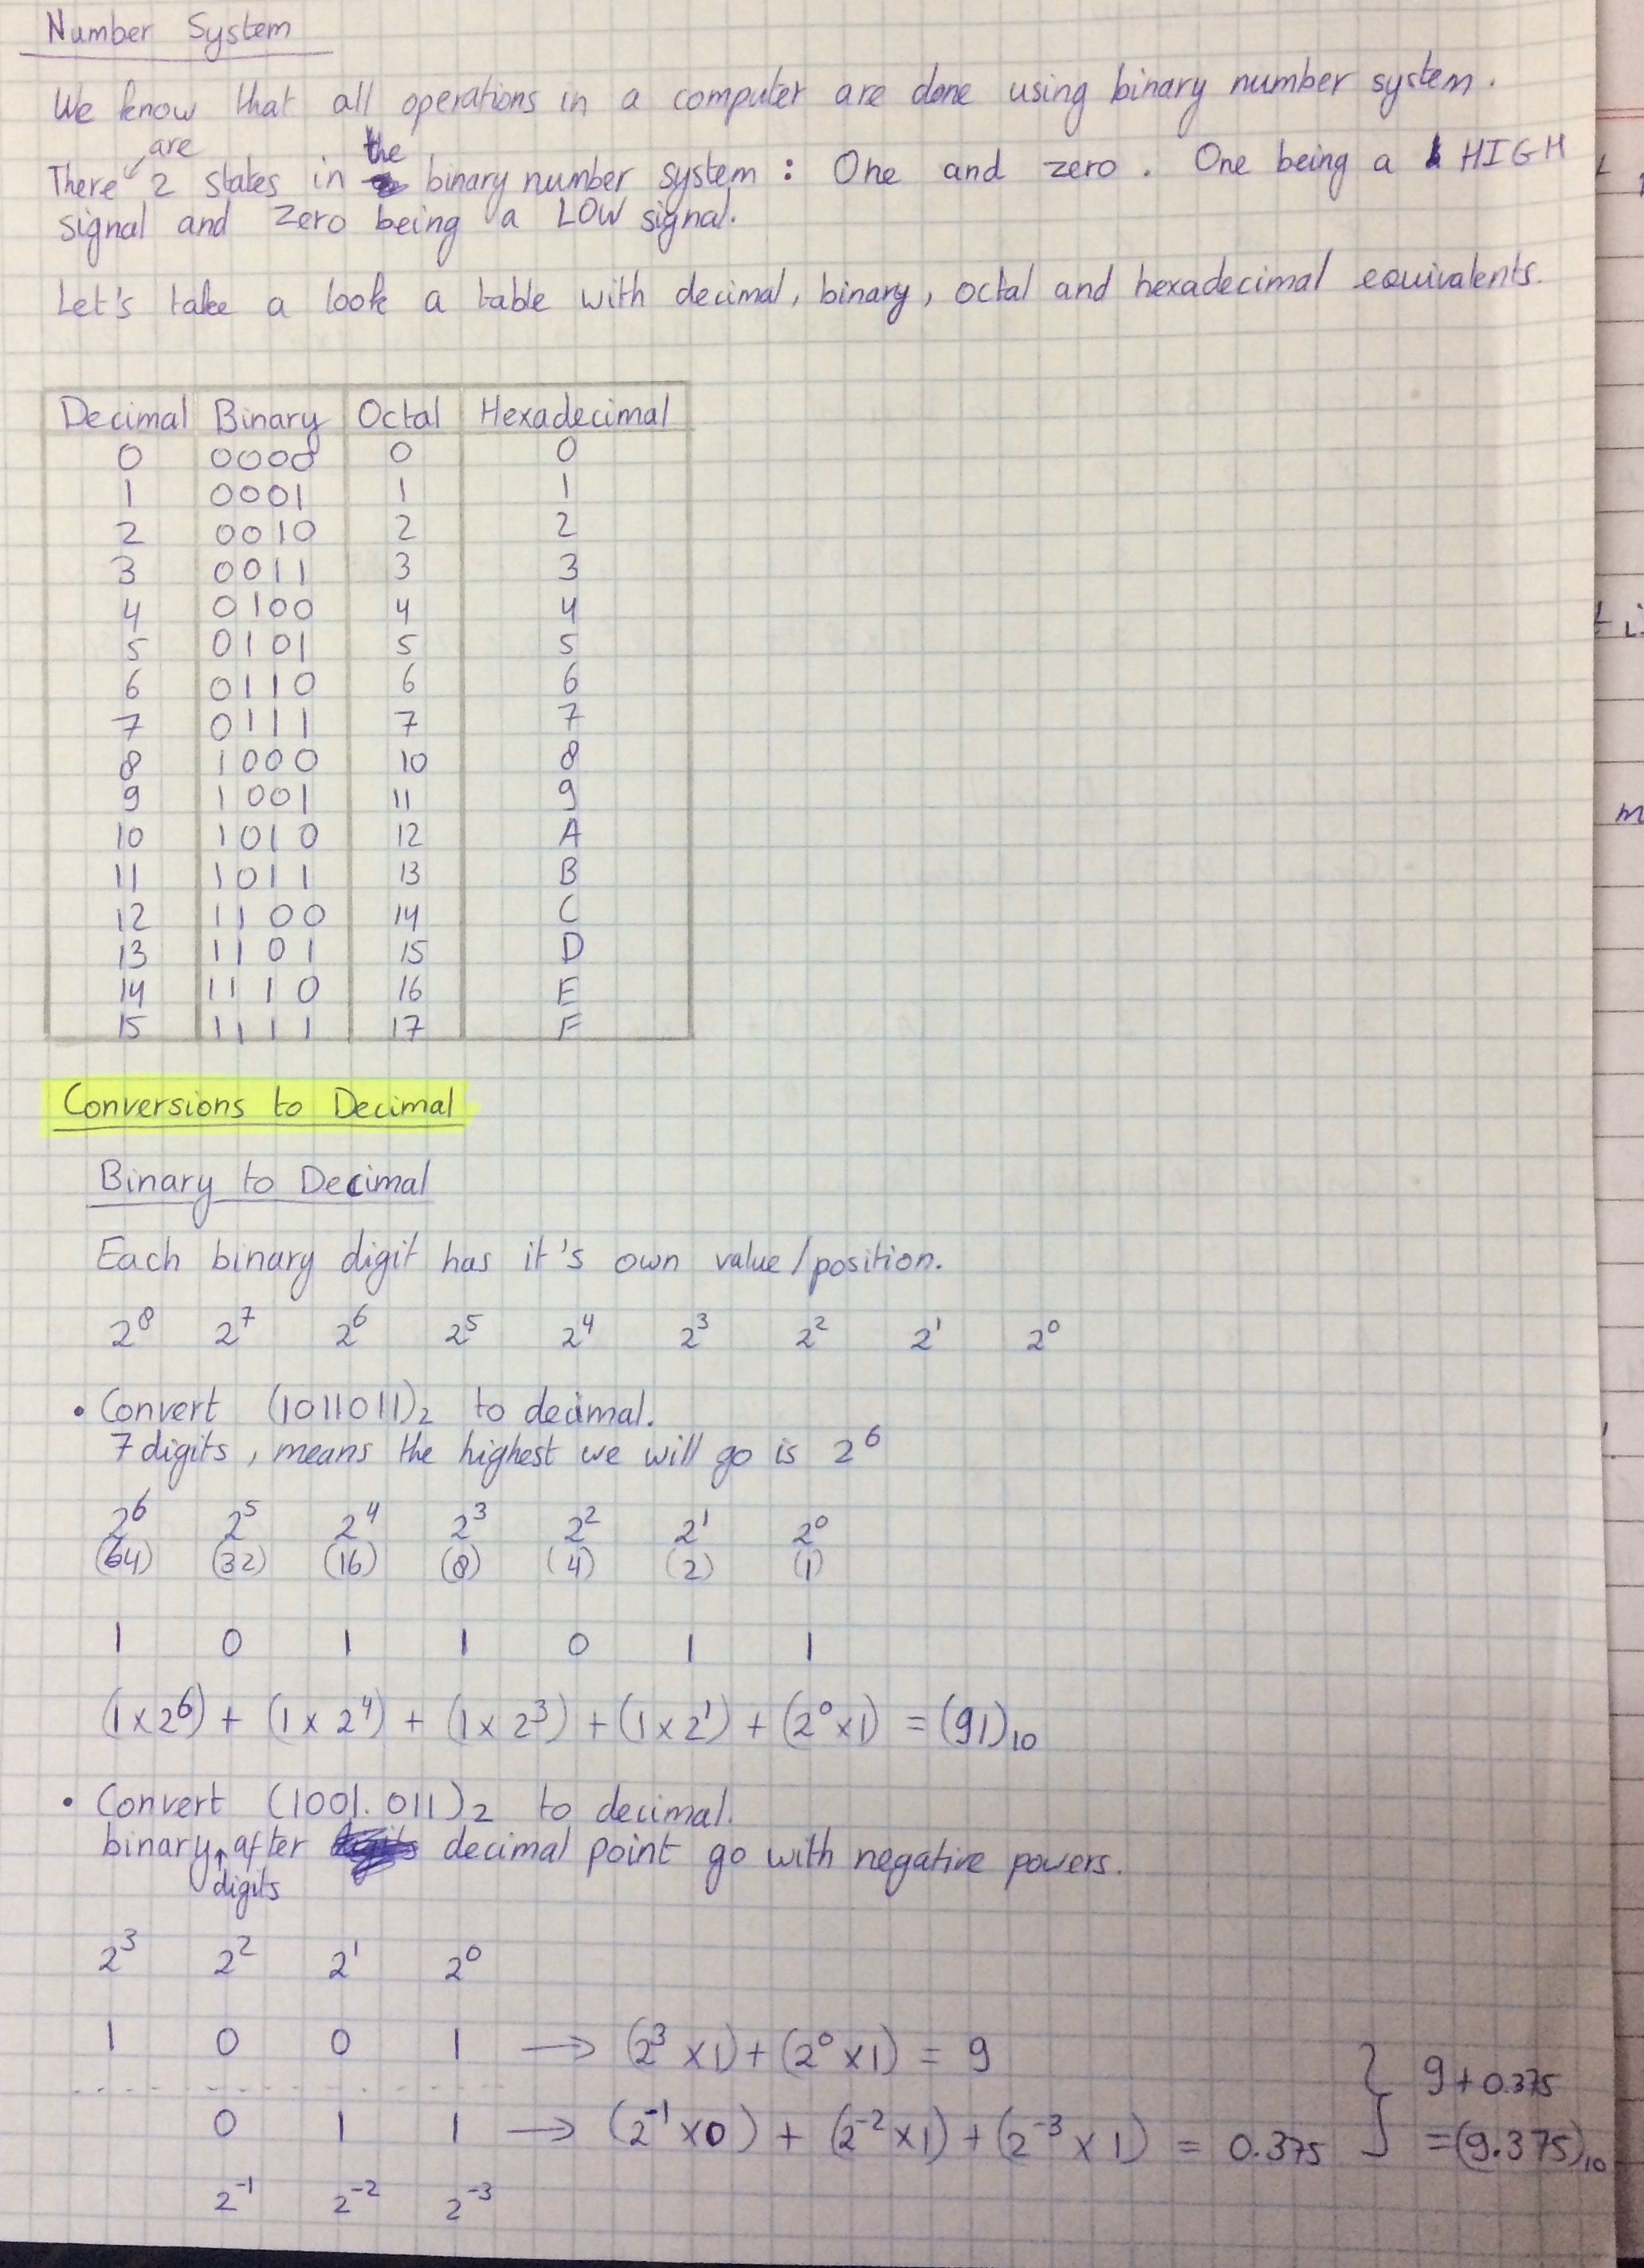 Number Systems Notes (Handwritten)-Number System 1.jpg